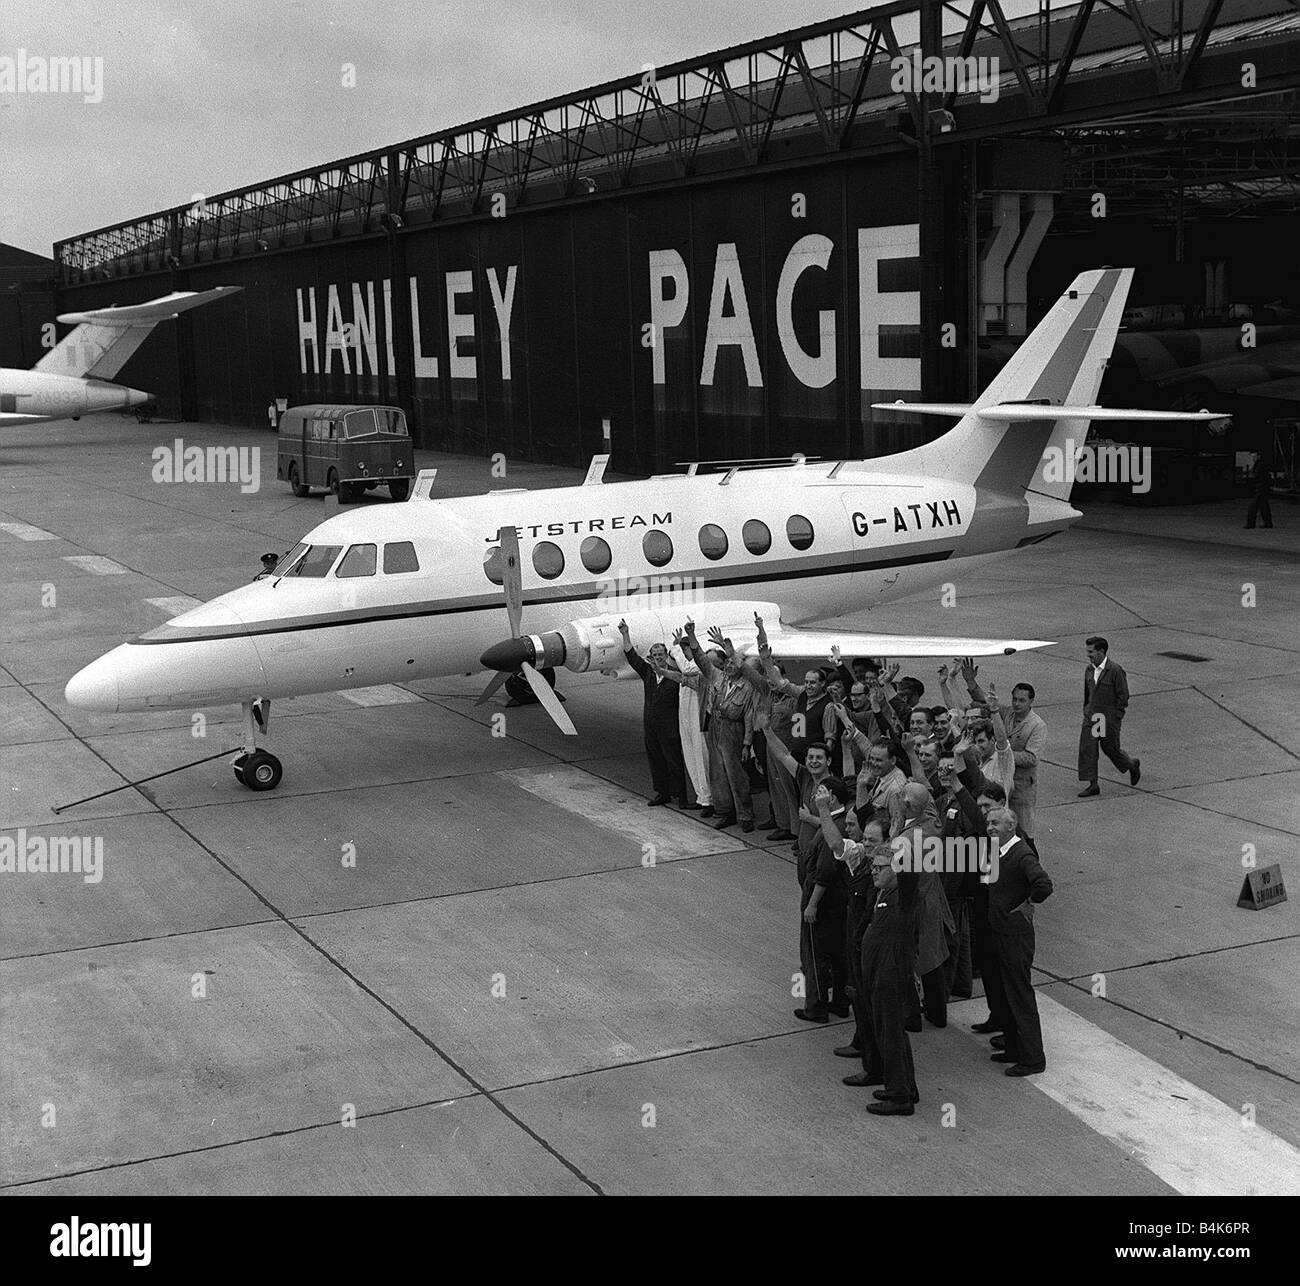 Aircraft Handley Page HP137 Jetstream prototype June 1967 G ATXH Handley Page s first Jetstream Business Aircraft was rolled out at the Ten Acre final assembley hall at Radlett Aerdrome Hertfordshire LFEY003 Flight100 Stock Photo